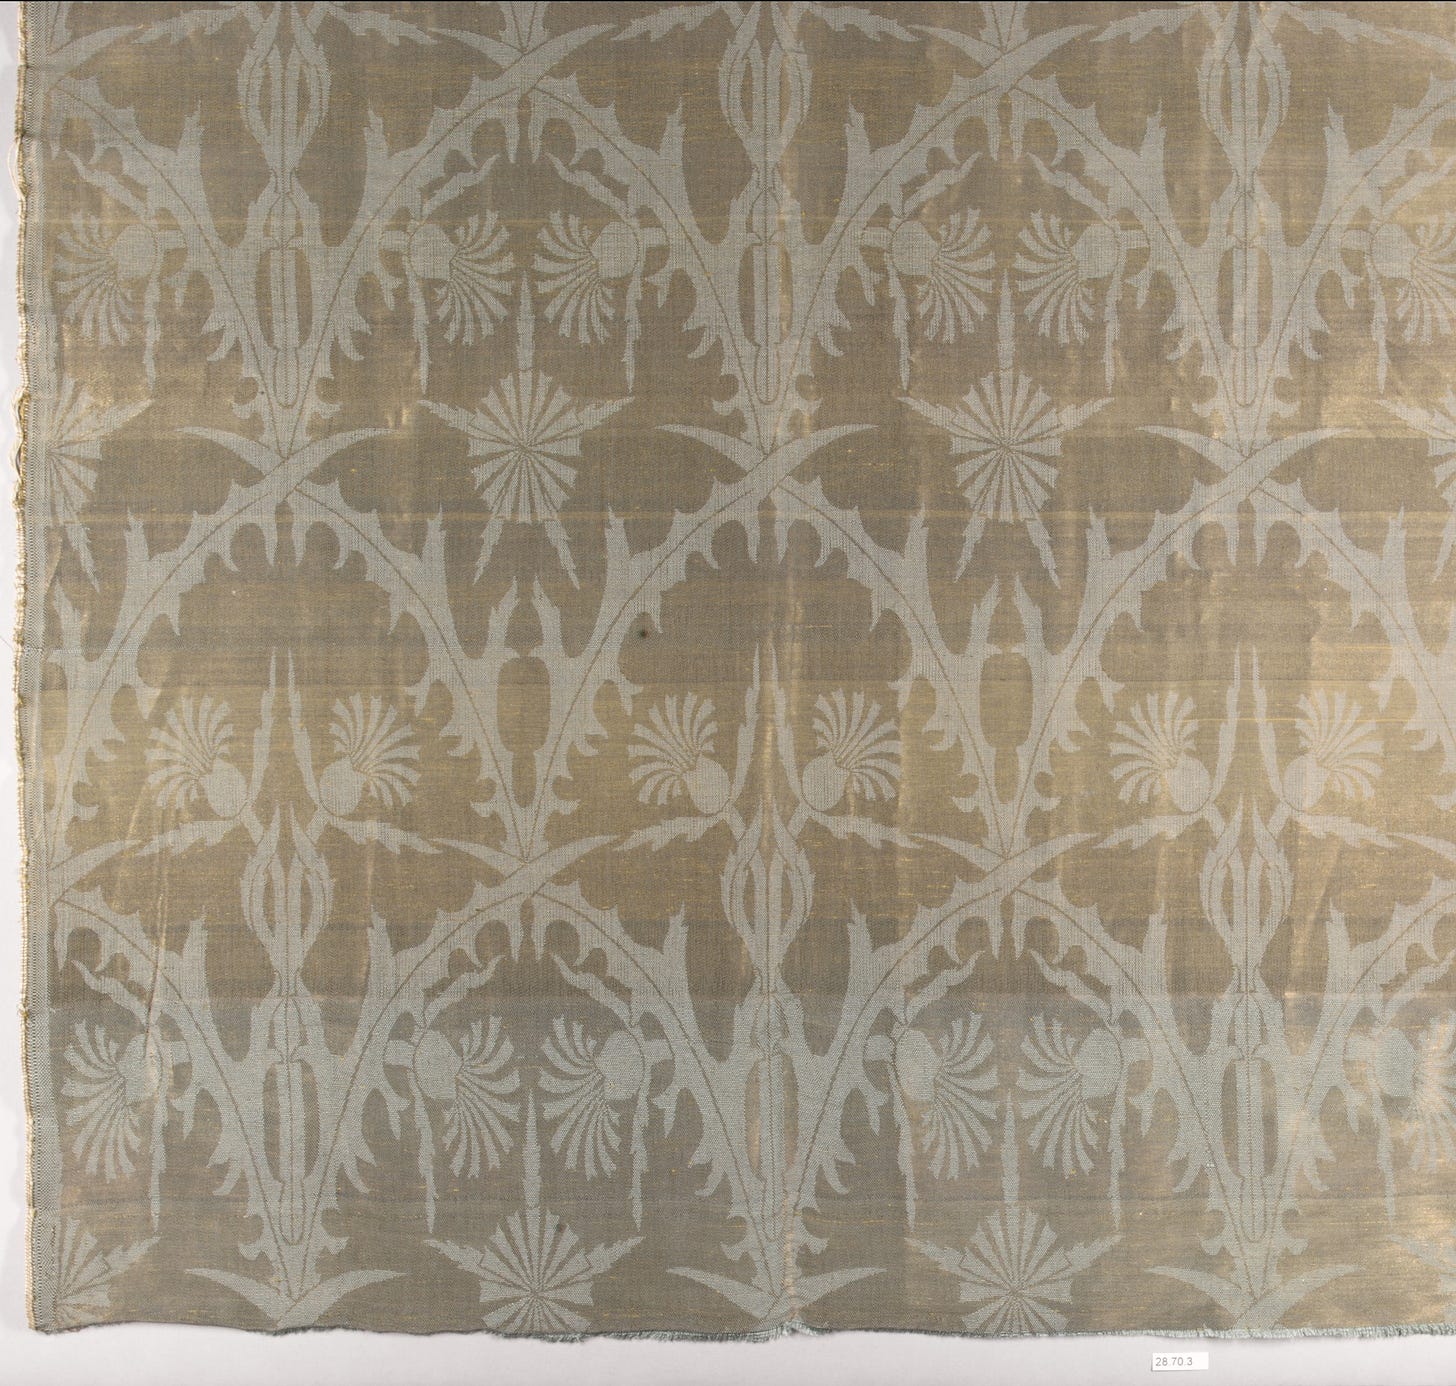 Thistle textile, Designed by Tiffany & Wheeler (1879–1881), Silk and metal threads, damask, woven, American